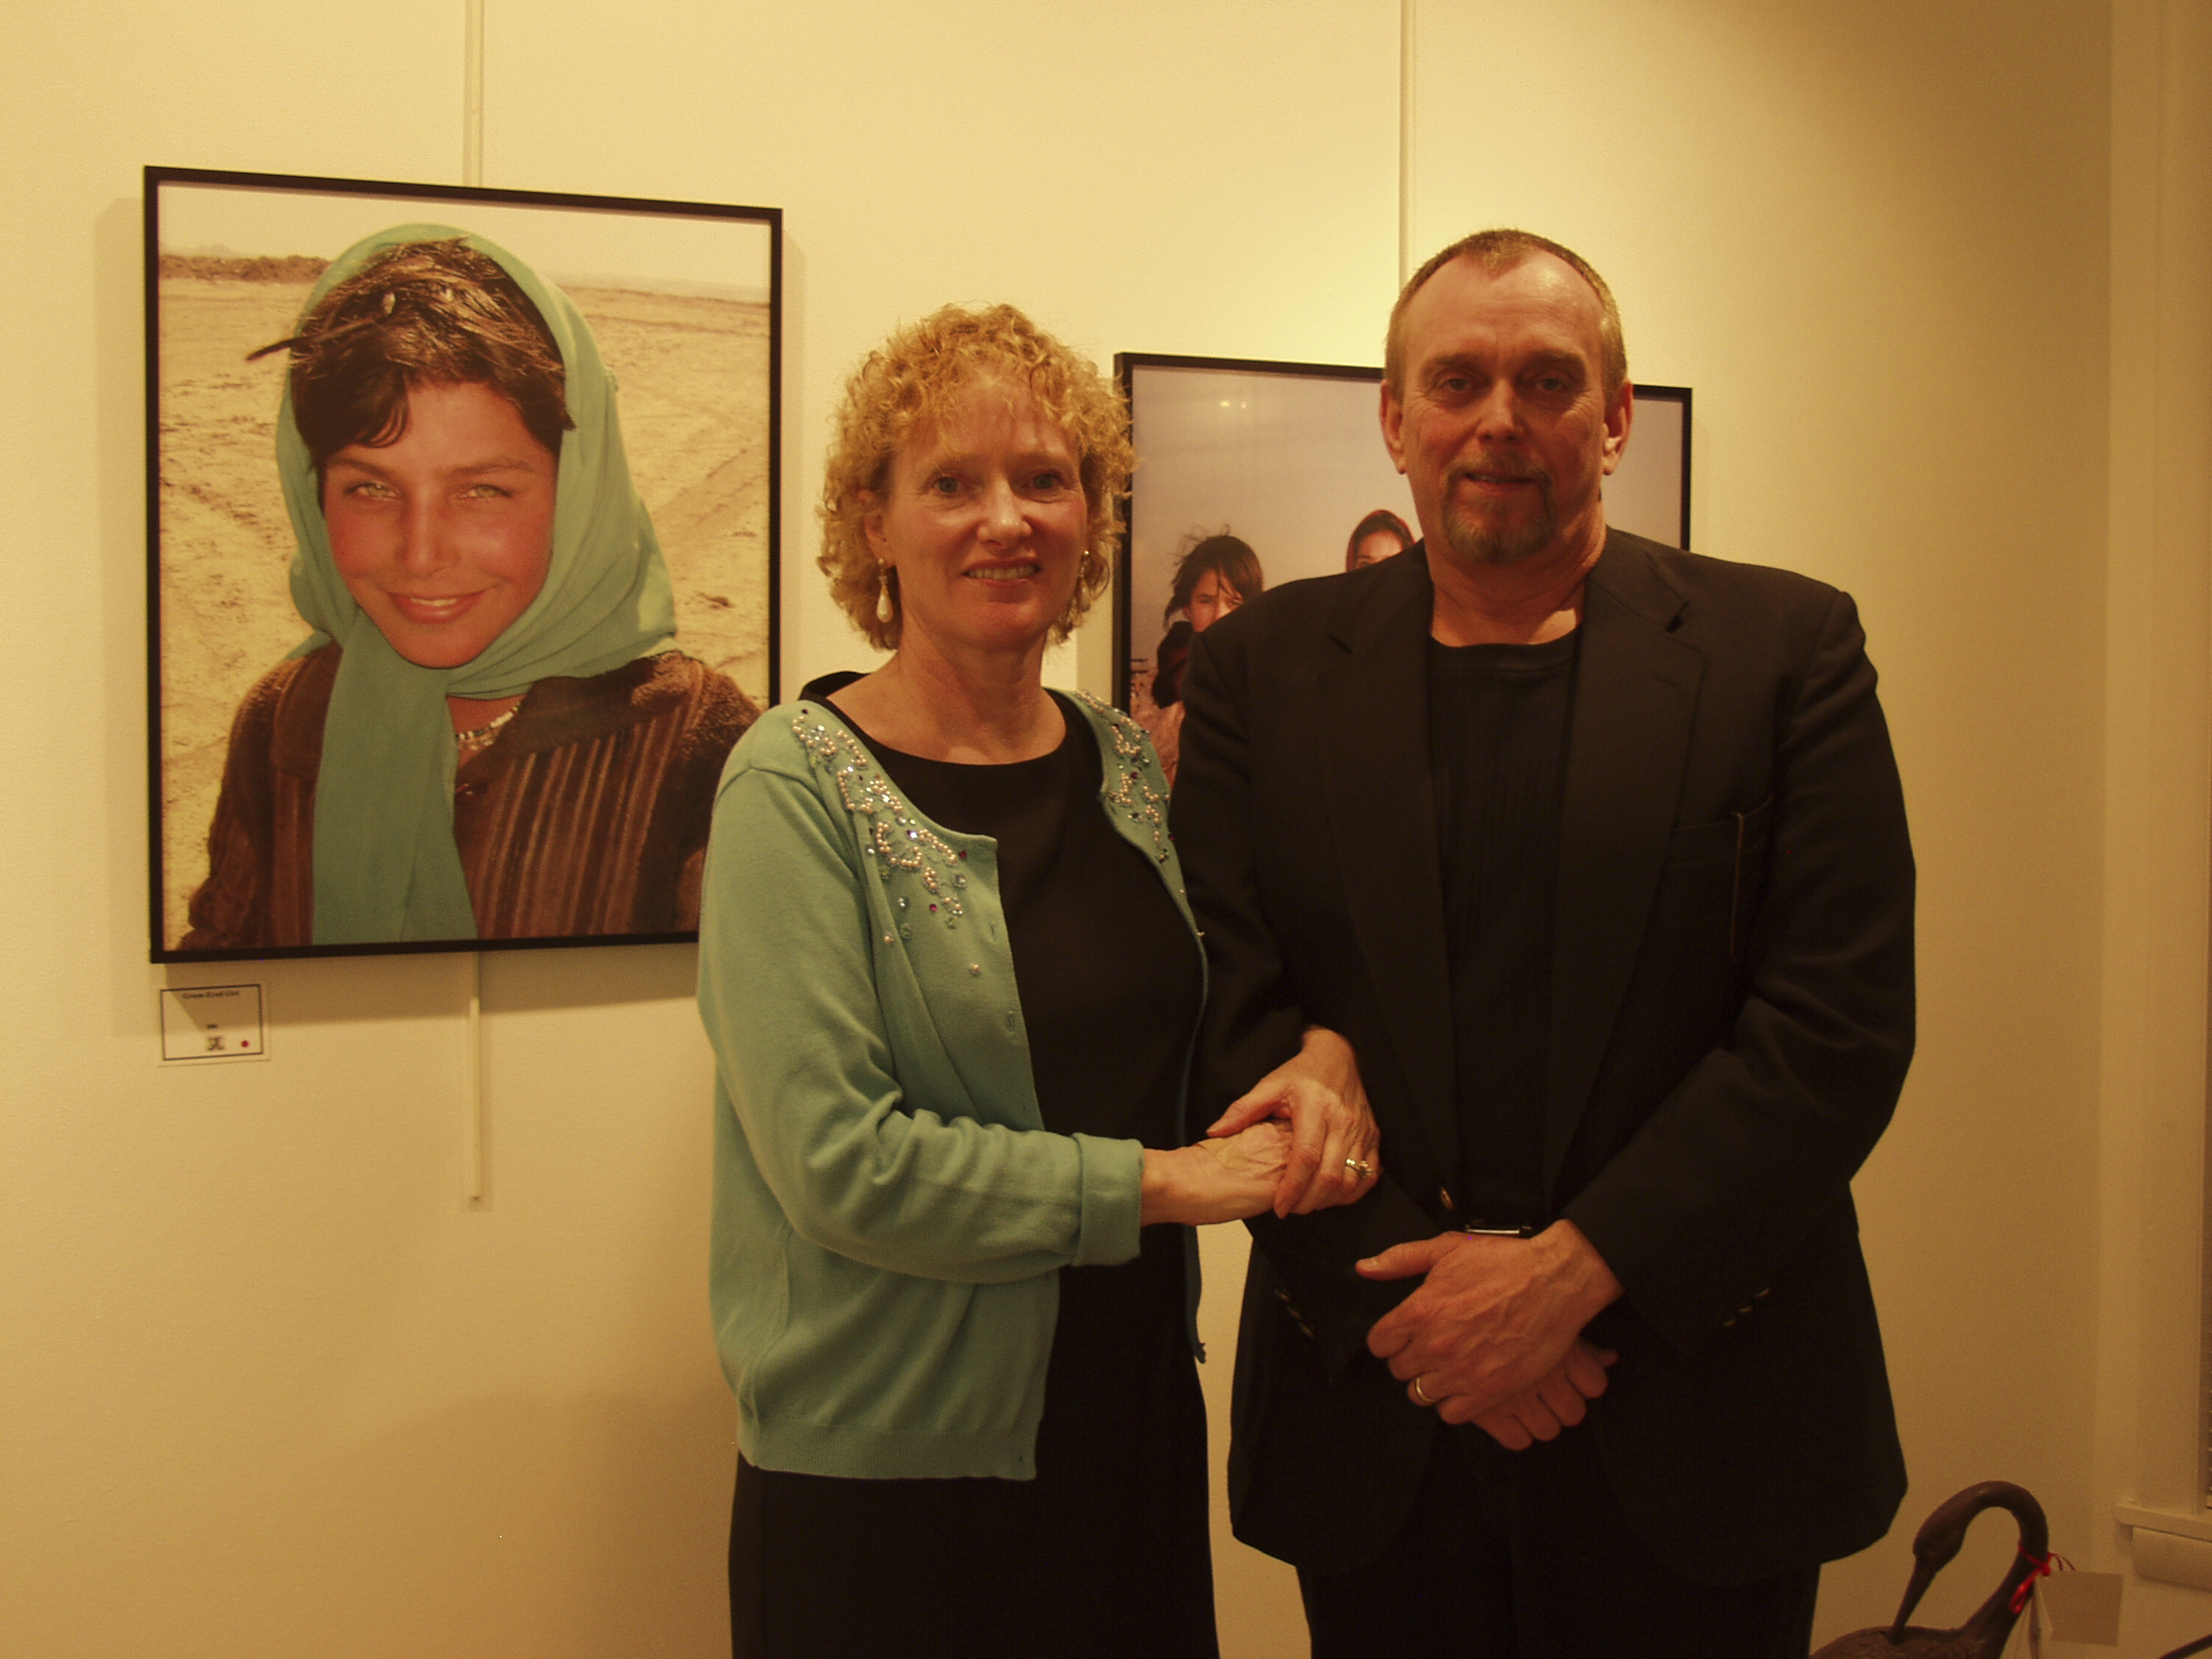 Actor-director Anthony Hornus (Dean Teaster's Ghost Town, Miracle at Sage Creek) with wife, Betsy Hull (An Ordinary Killer, A State of Hate) at a photography exhibit for the documentary film, 